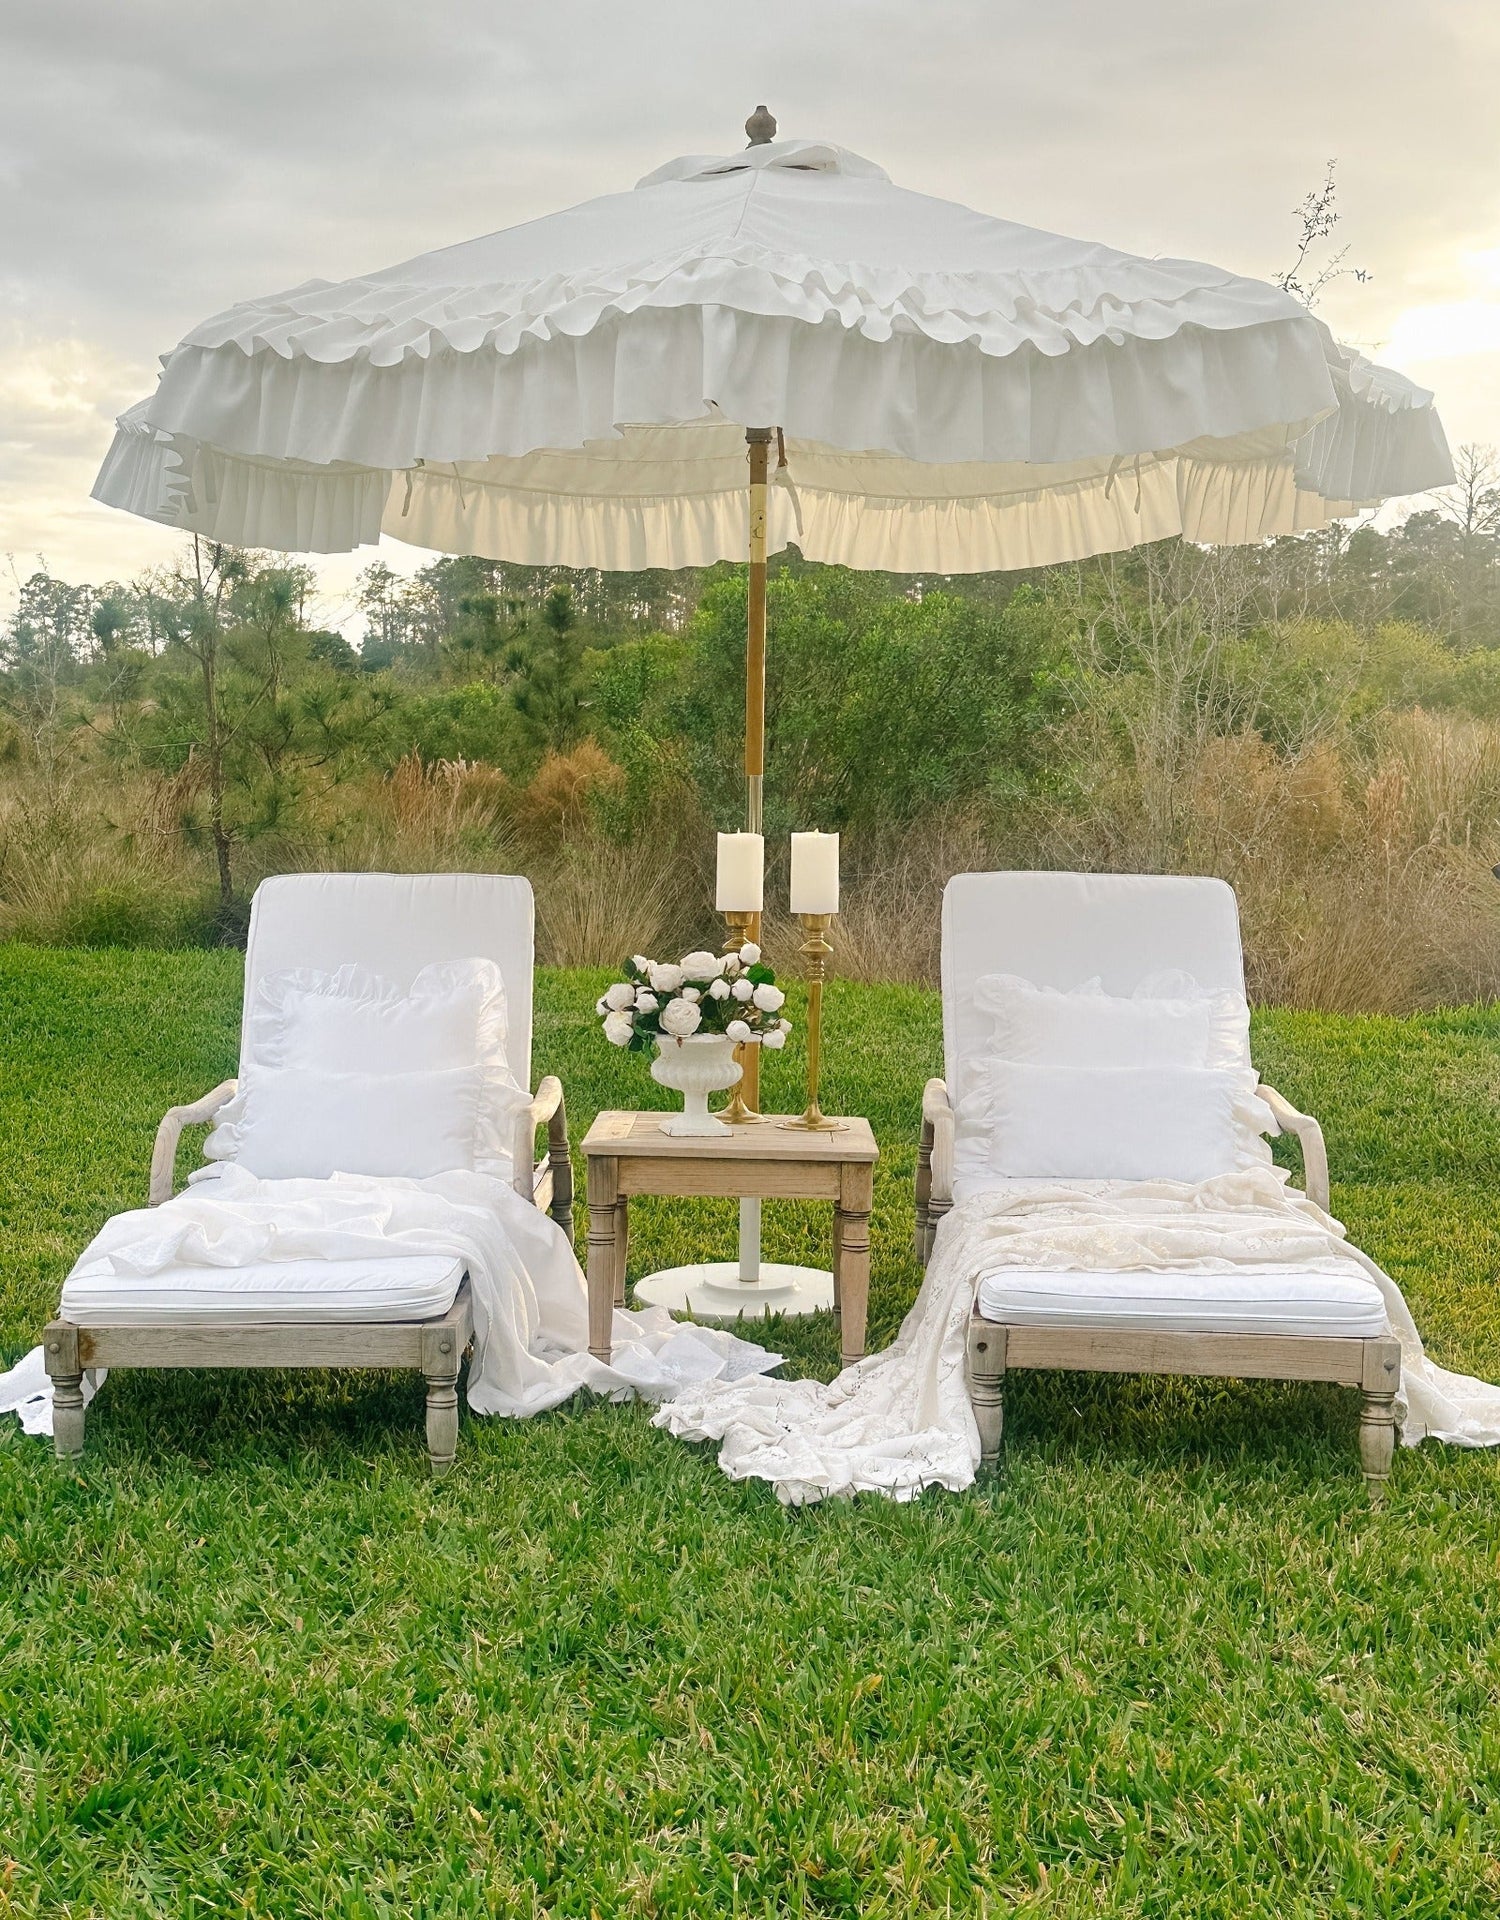 Ruffled 3 Tier White Outdoor Patio Umbrella and White Chaise Lounge Chairs